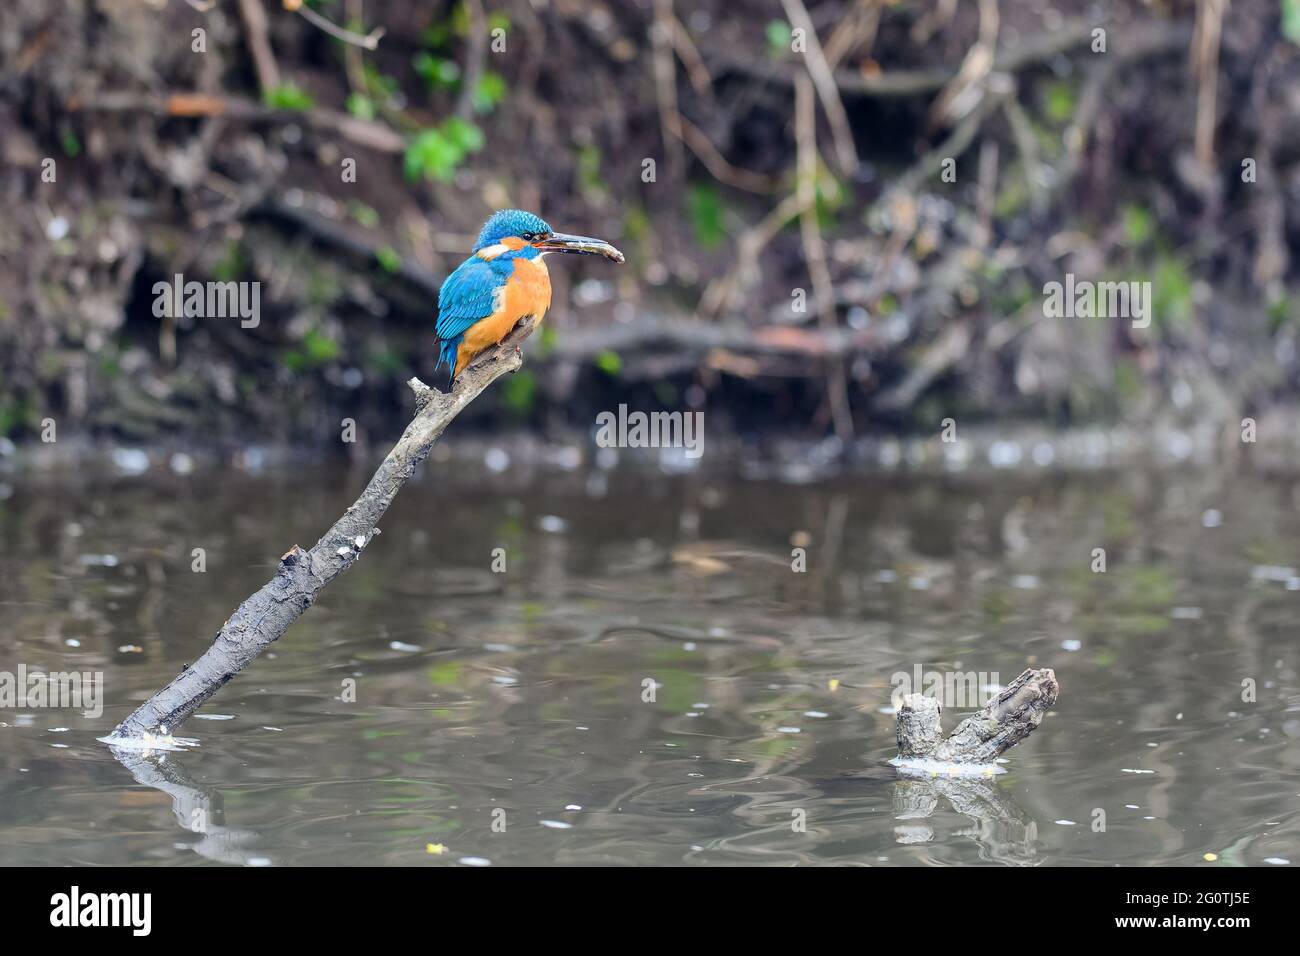 The male Kingfisher (Alcedo atthis) sits on a twig with a small fish in its beak. Stock Photo